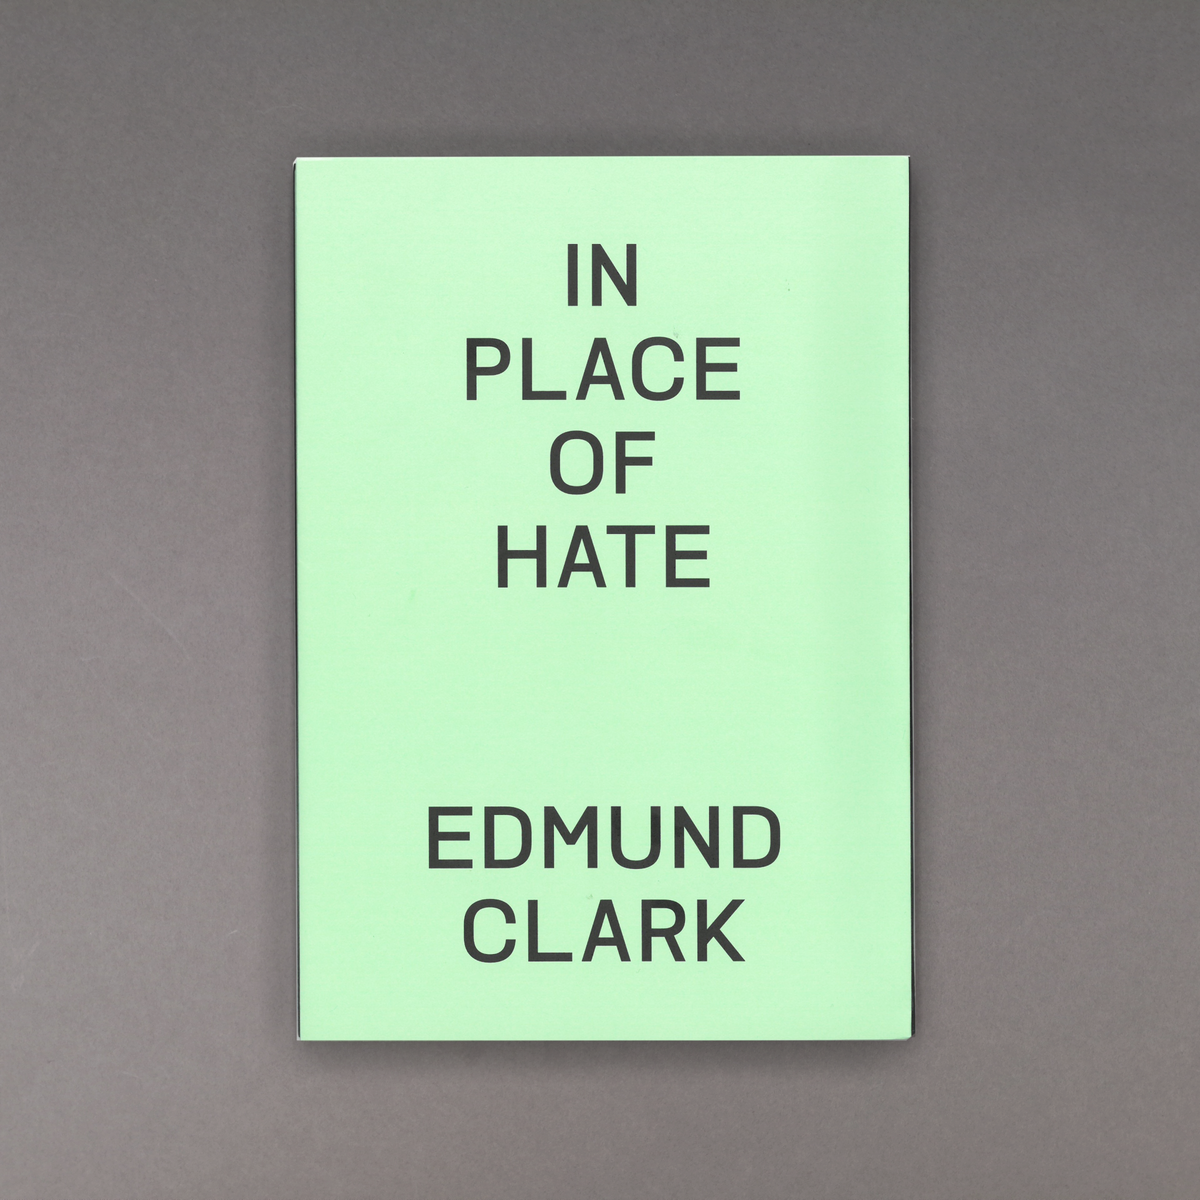 Edmund Clark: In Place of Hate